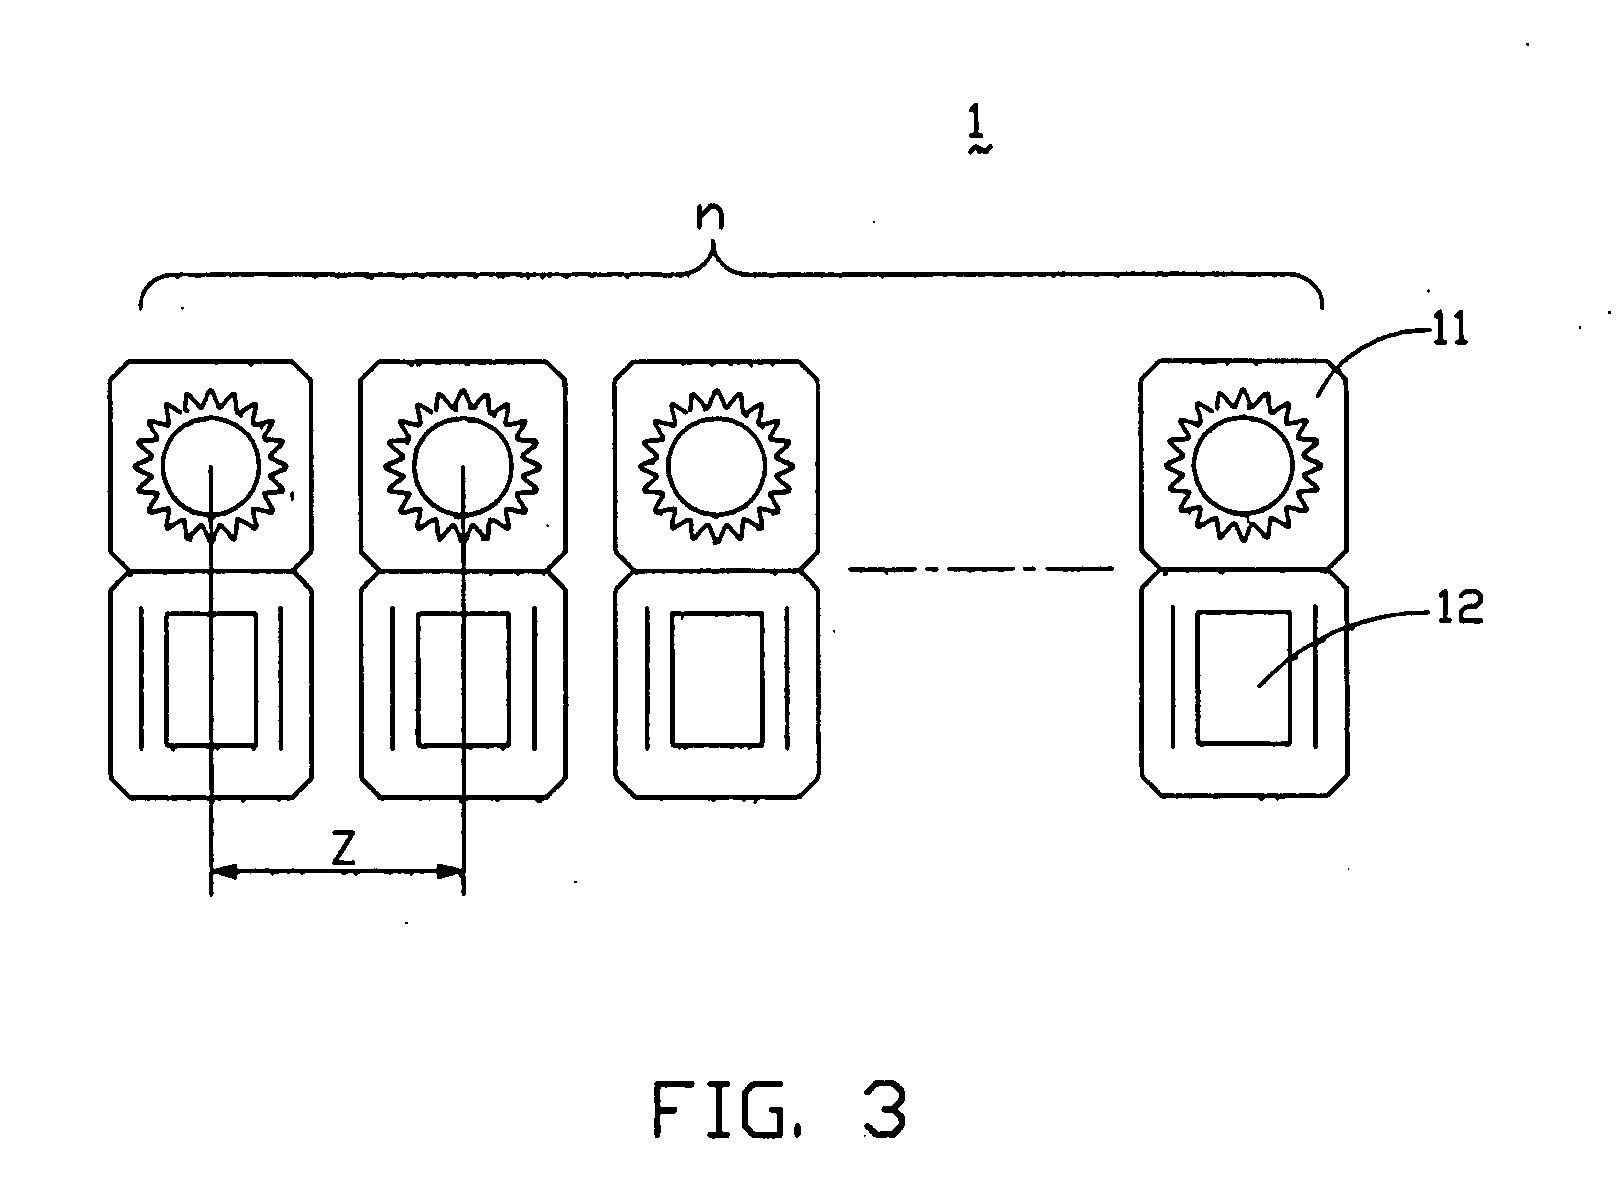 Heat dissipating circulatory system with sputtering assembly